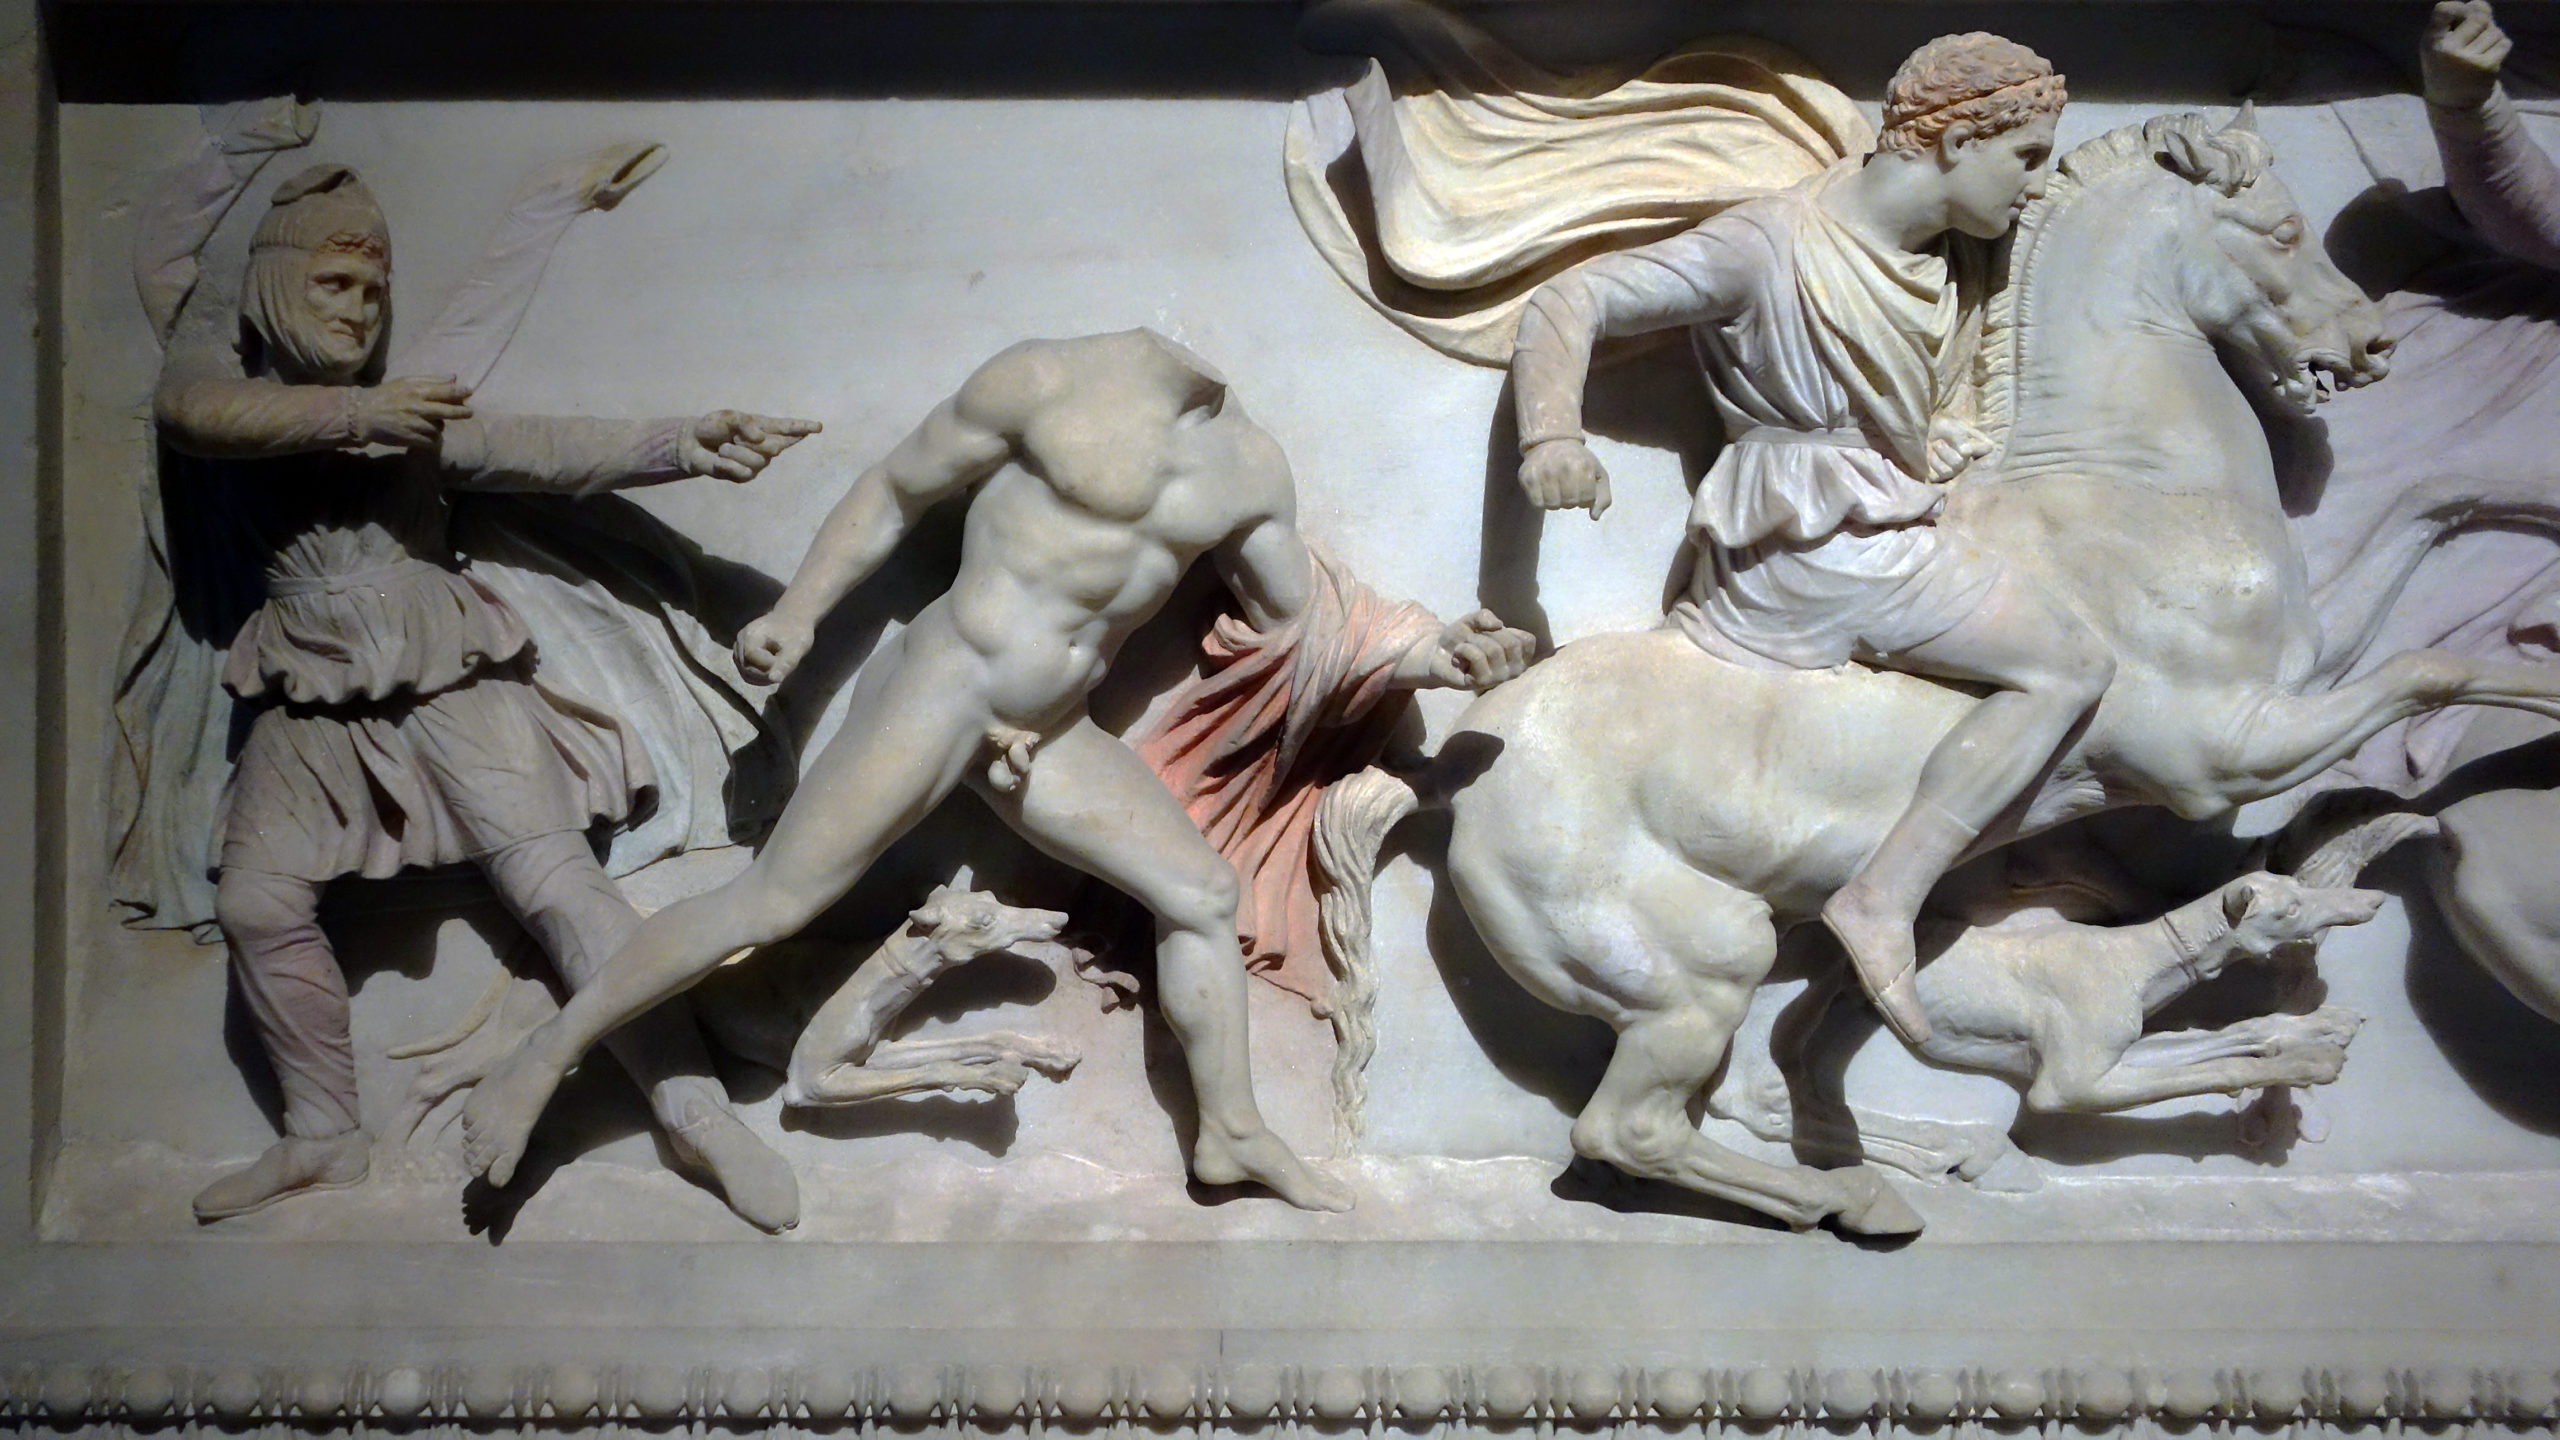 An interest in human anatomy and ideal bodies can be seen in this ancient Greek sarcophagus. Hunting scene (detail), The Alexander Sarcophagus, c. 312 B.C.E., Pentelic marble and polychromy, found in Sidon, 195 x 318 x 167 cm (İstanbul Archaeological Museums; photo: Steven Zucker, CC BY-NC-SA 2.0)